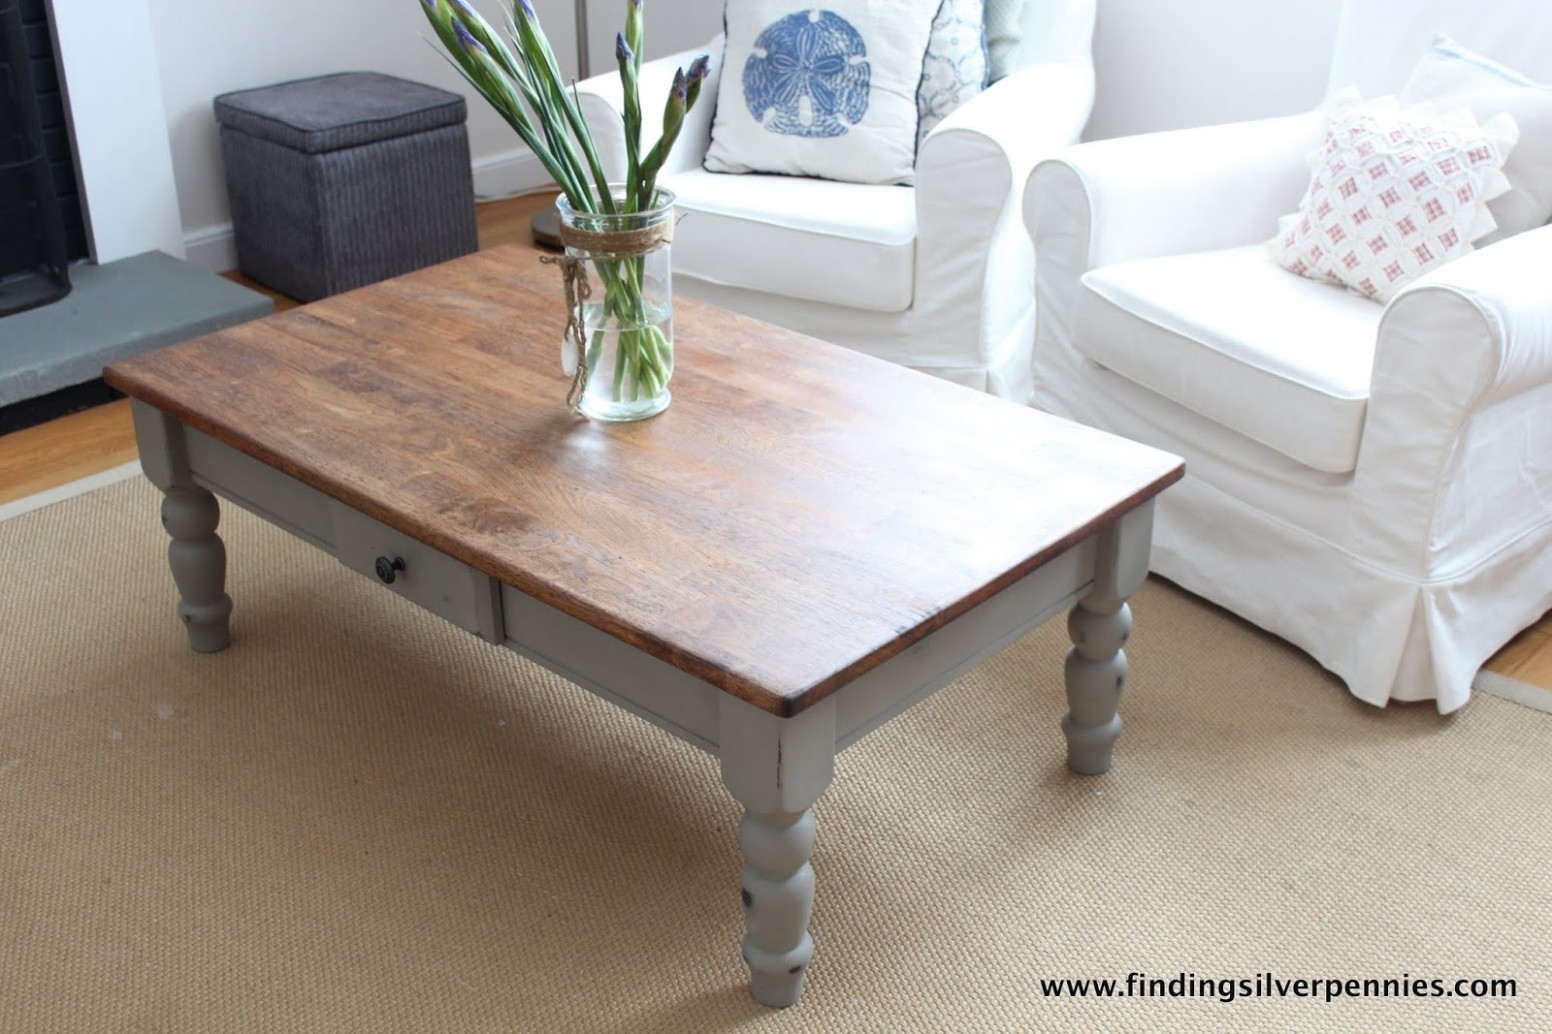 French Linen Coffee Table Finding Silver Pennies Annie Sloan Chalk Paint Linen